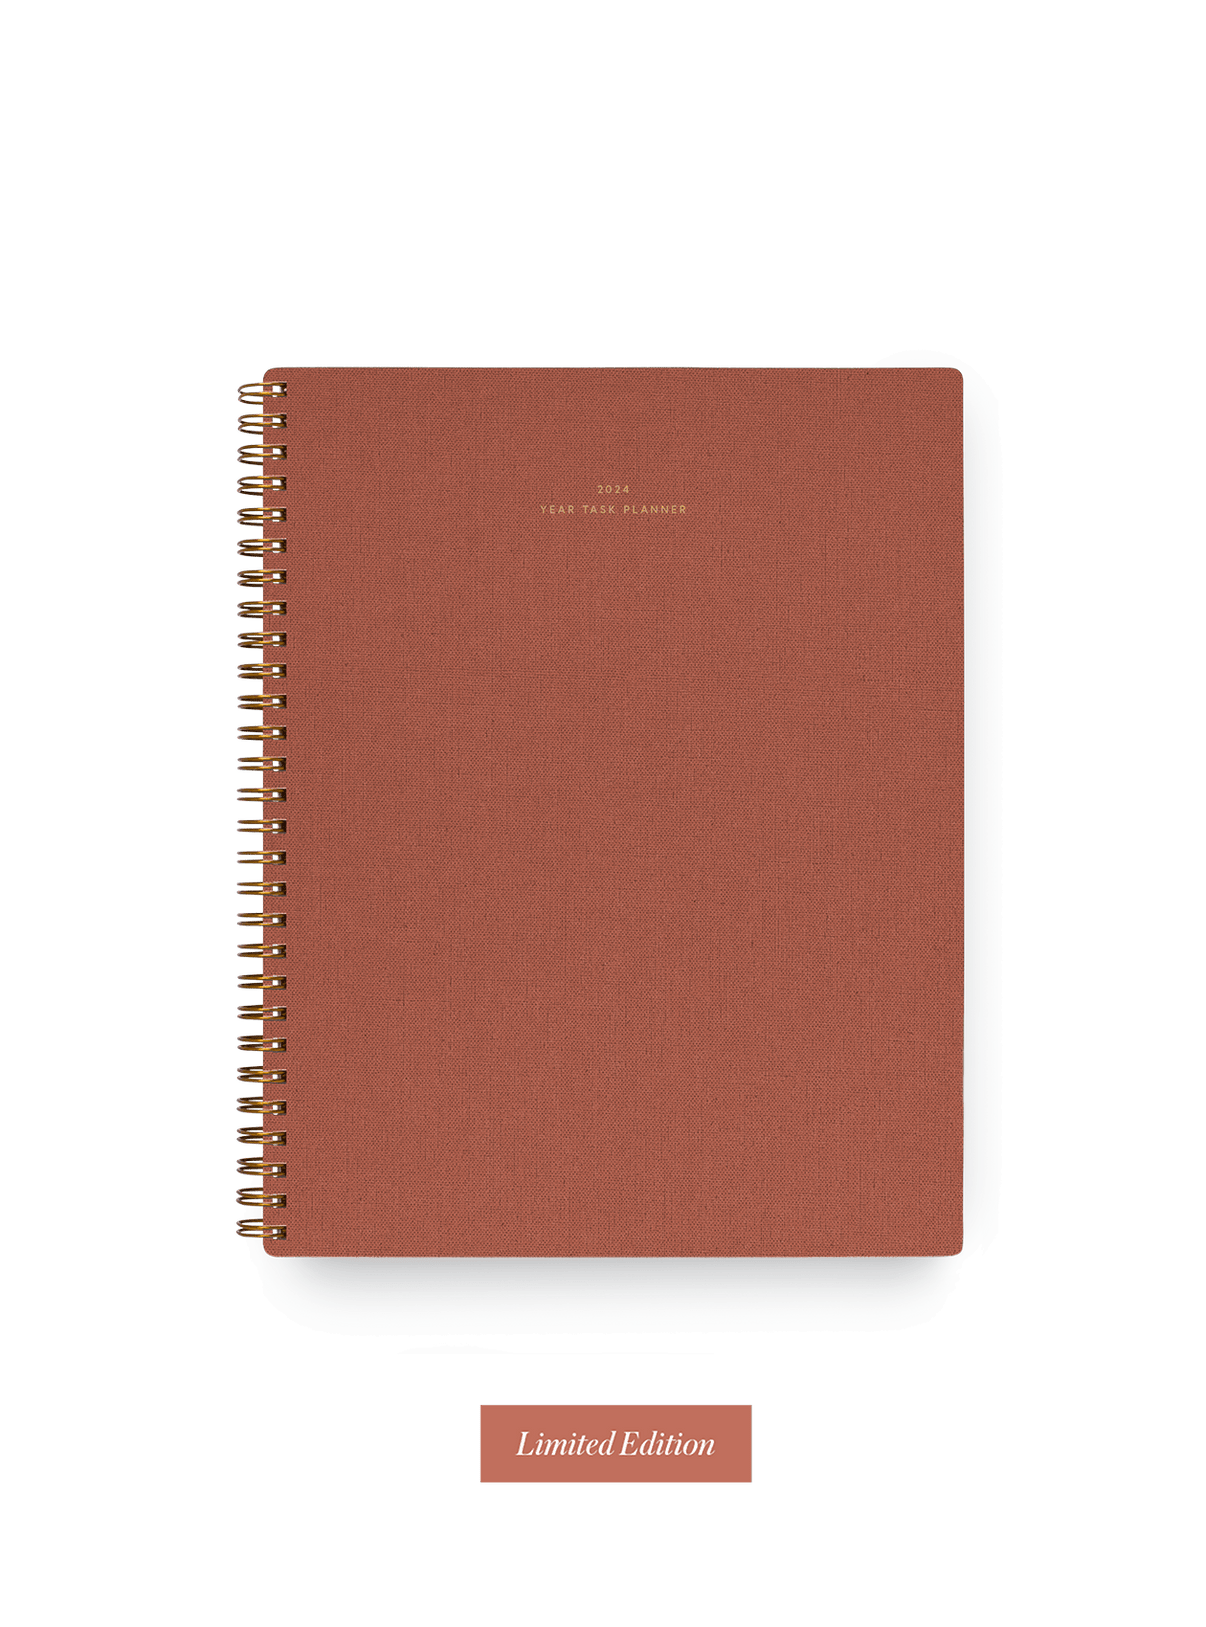 The Appointed 2024 Year Task Planner in Sienna with brass wire-o binding, foil details, and textured bookcloth covers || Sienna